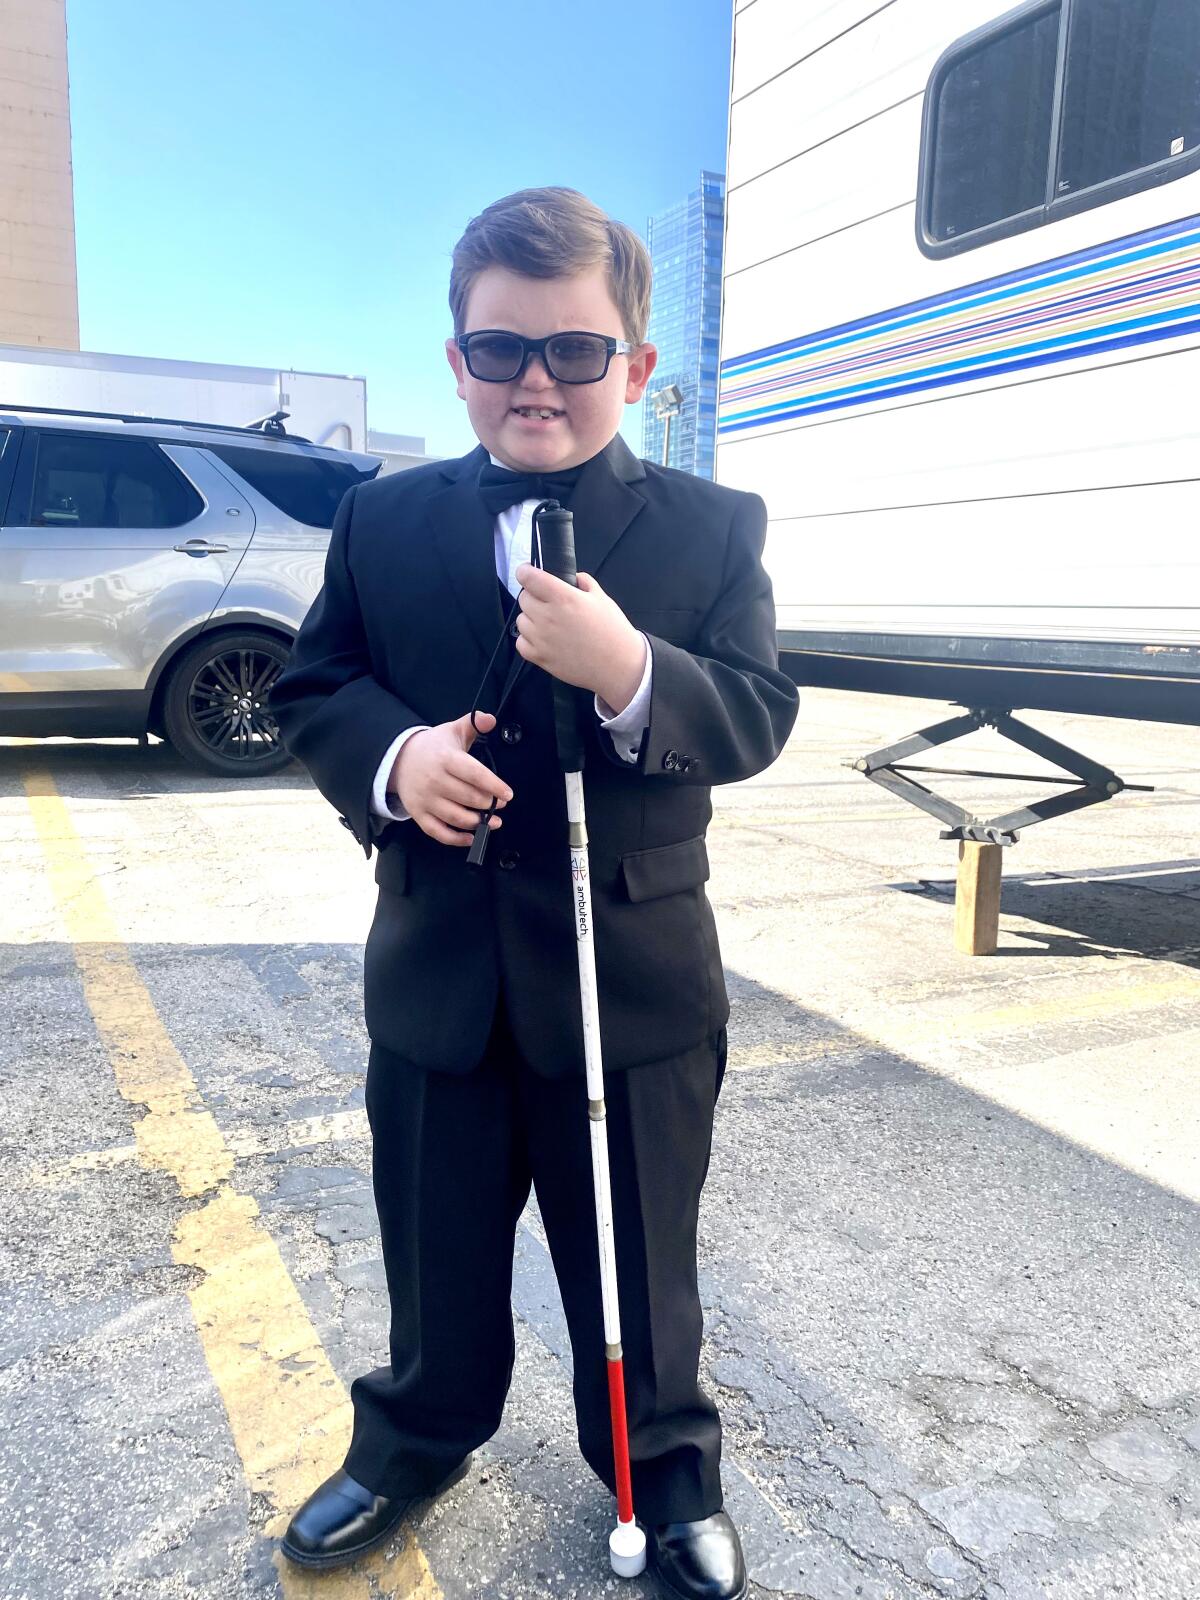 Child actor Karl Seitz of Huntington Beach, who is visually impaired, has appeared on the NBC television show "This Is Us."